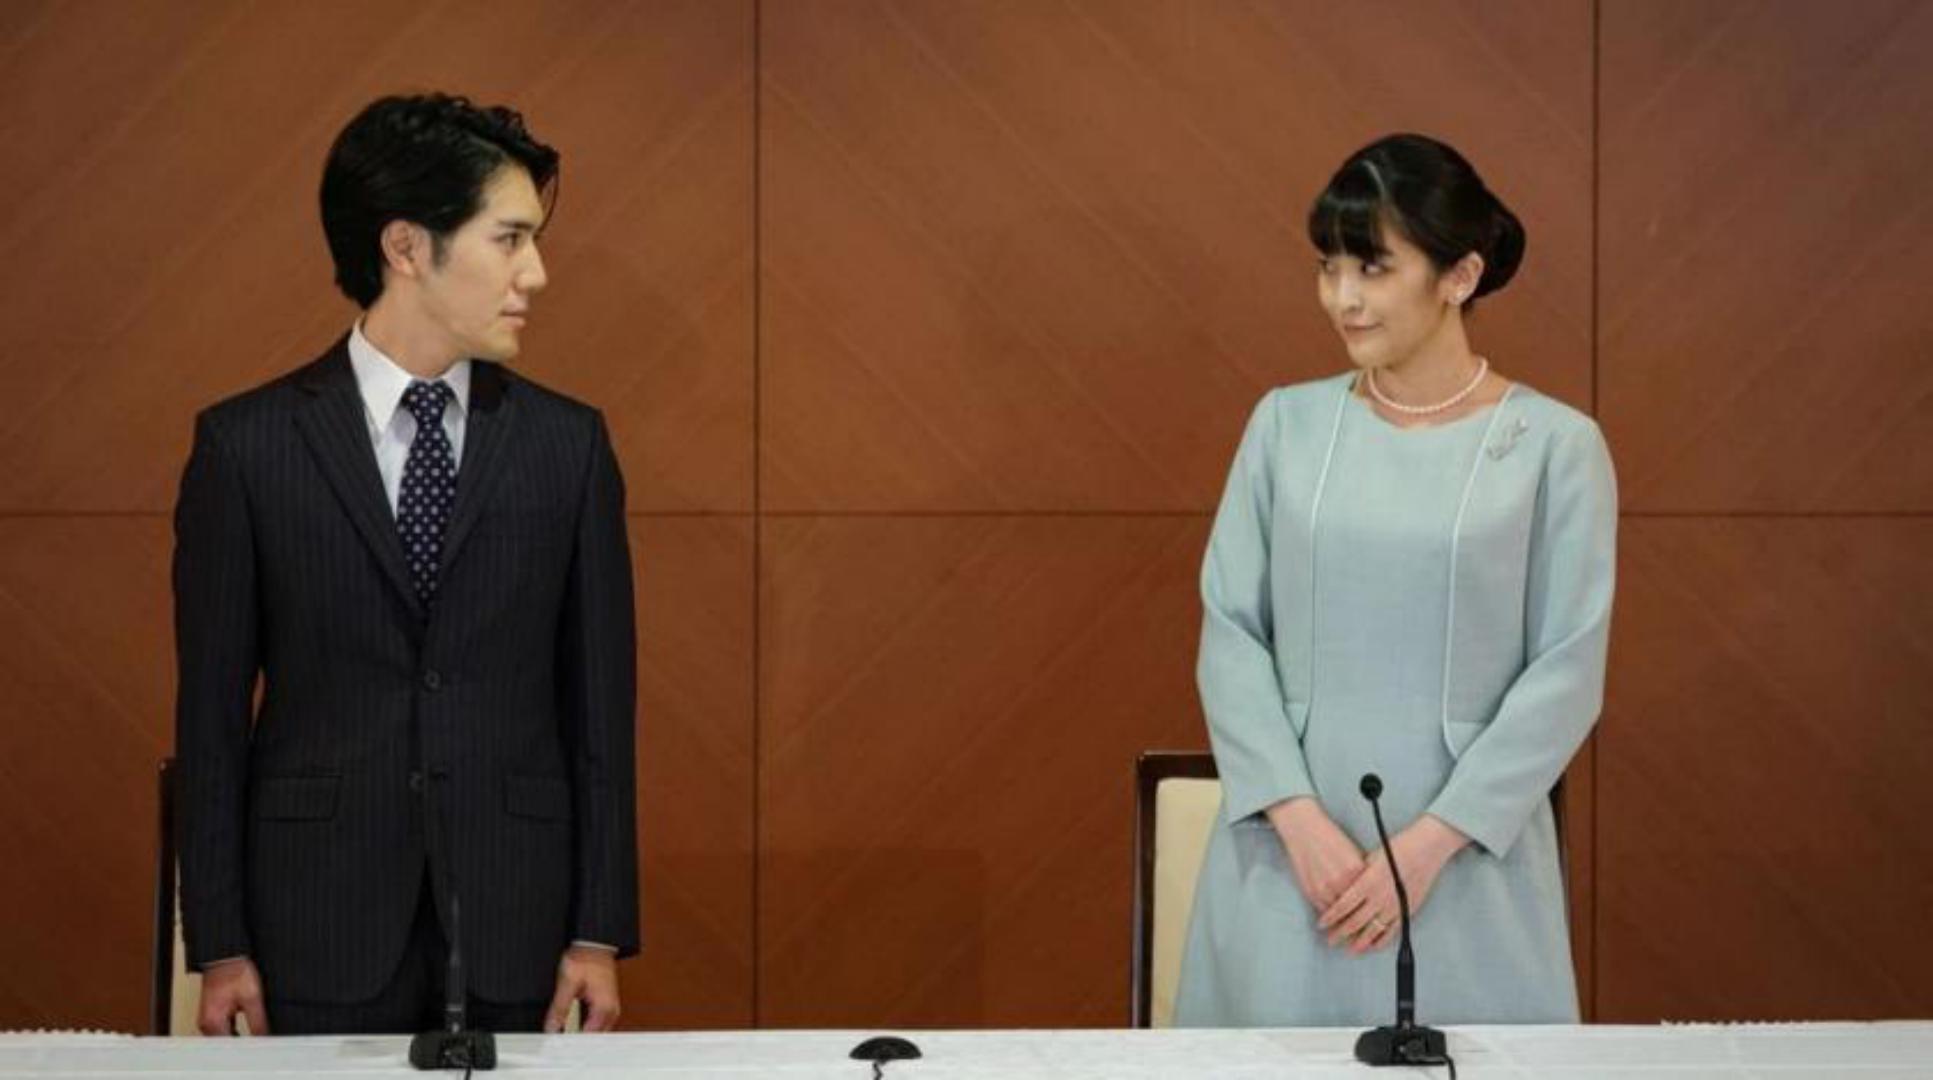  Japan’s Princess Mako and her husband Kei Komuro attend a news conference to announce their wedding at Grand Arc Hotel in Tokyo, Japan, October 26, 2021. (Reuters)